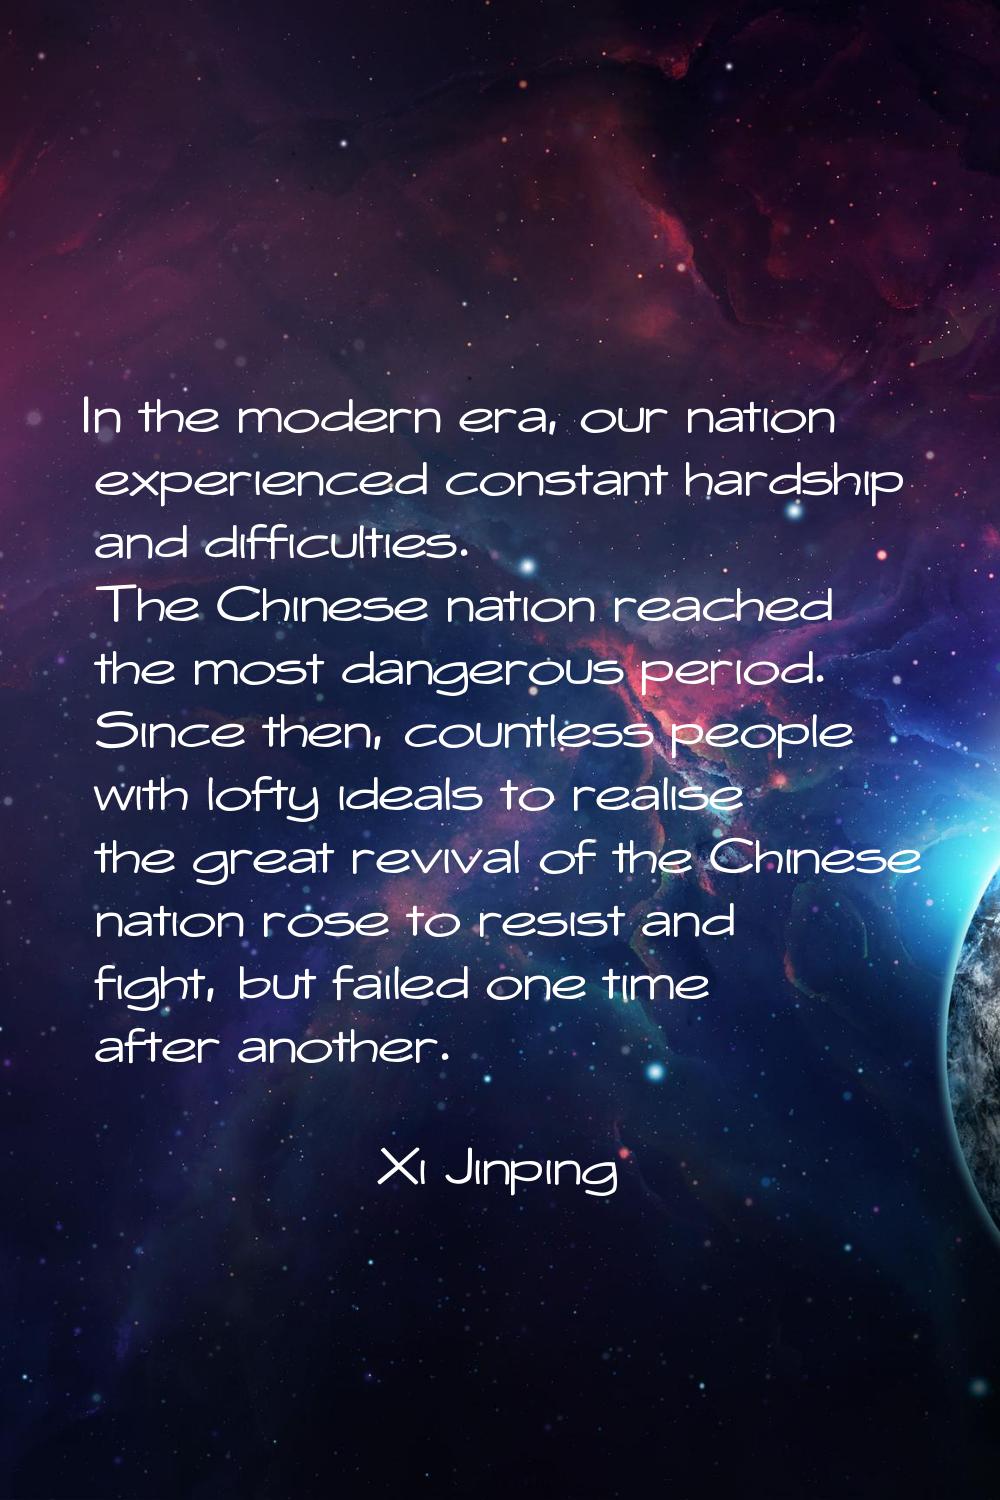 In the modern era, our nation experienced constant hardship and difficulties. The Chinese nation re